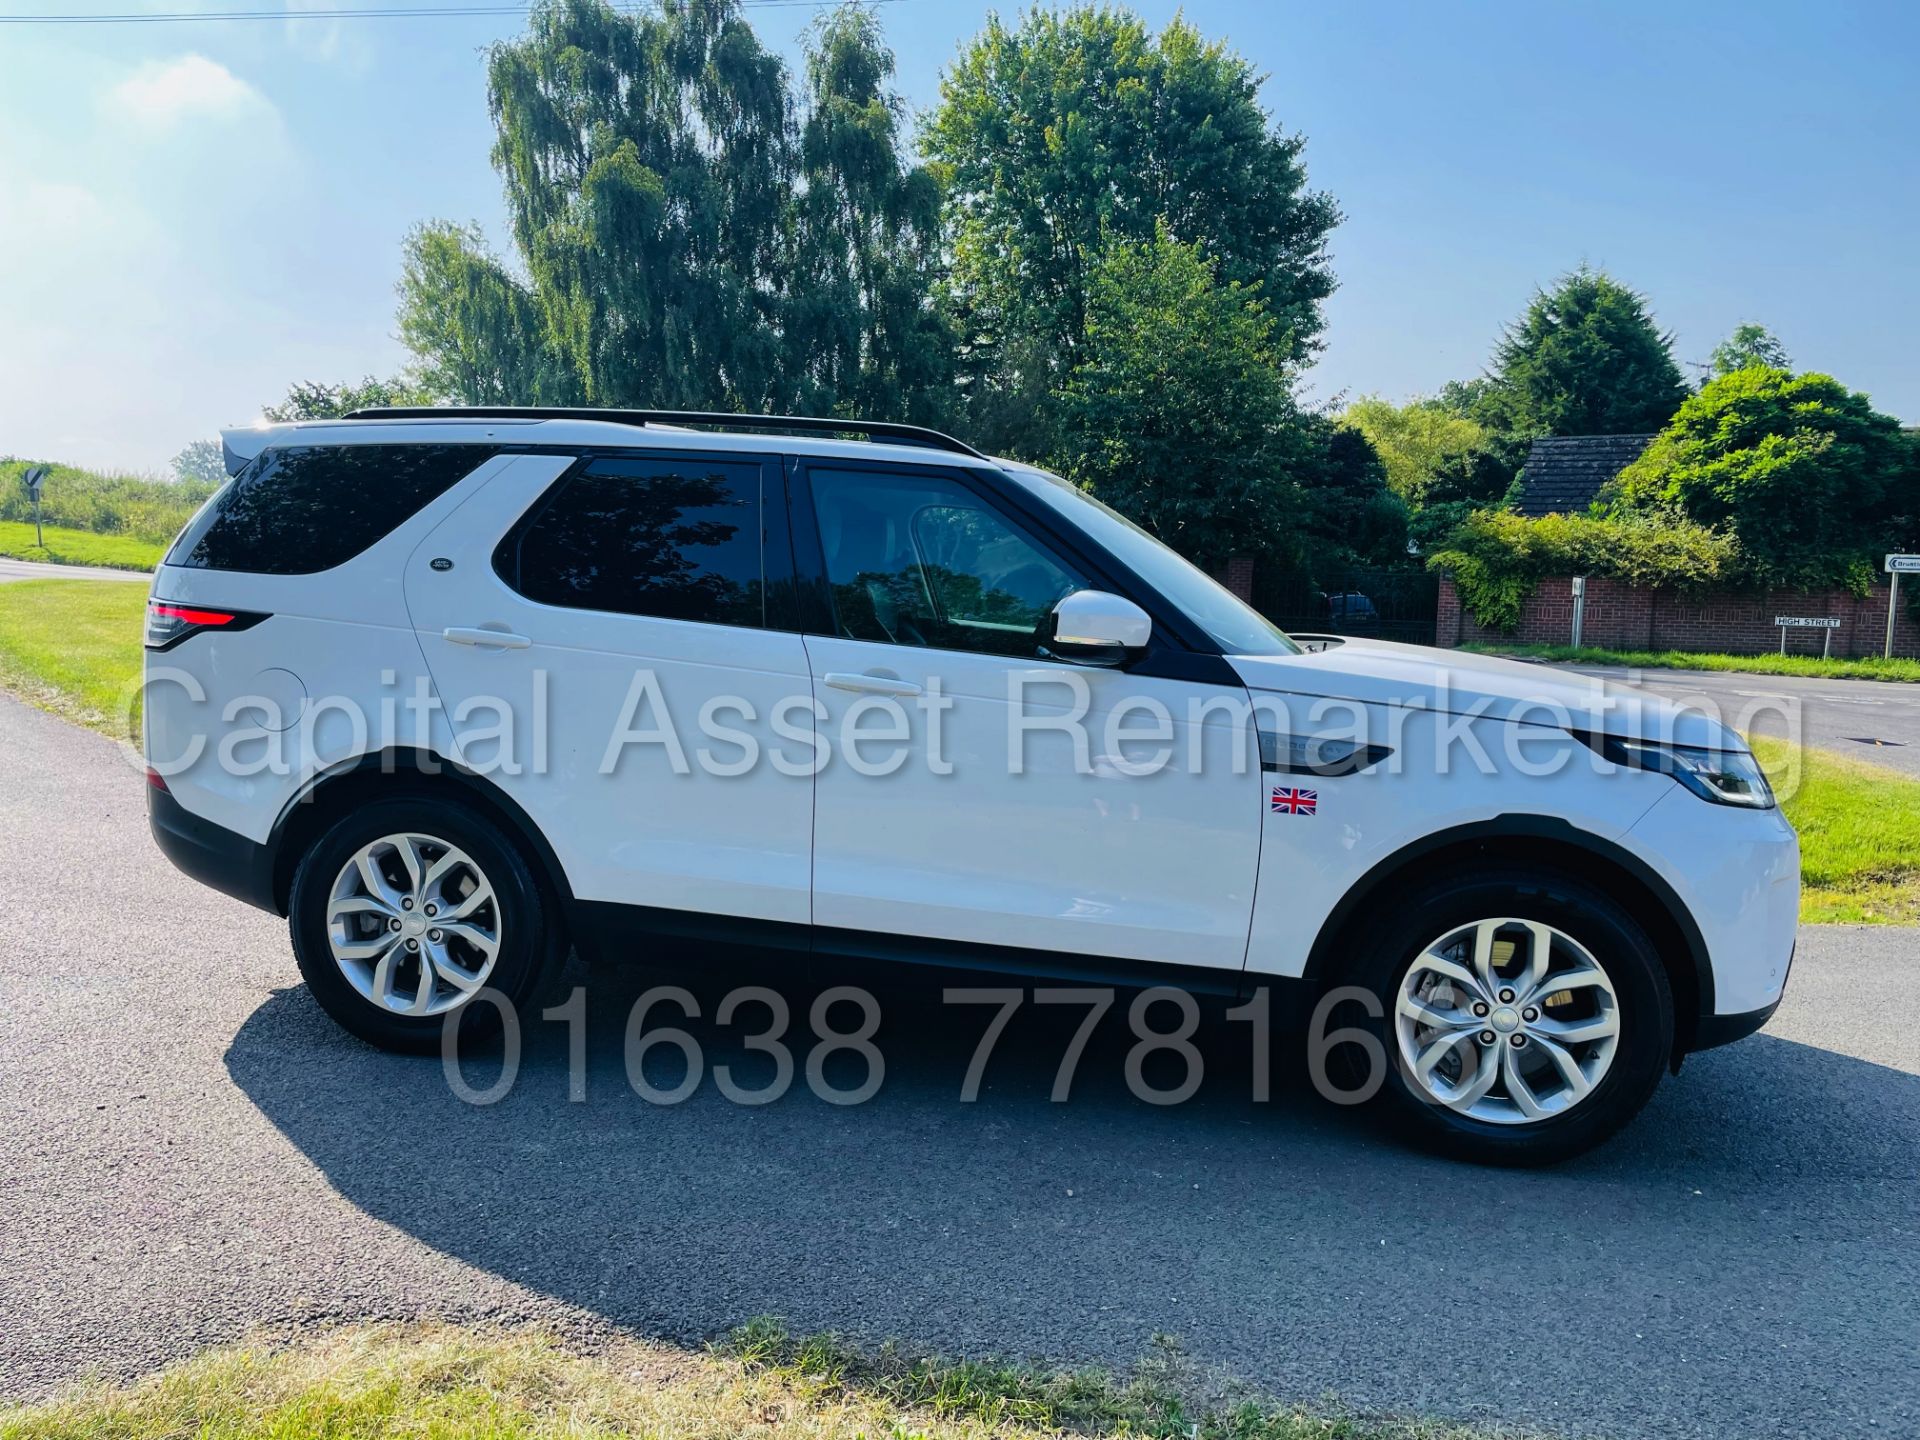 LAND ROVER DISCOVERY 5 *SE EDITION* SUV (2019 - EURO 6) '3.0 TD6 -306 BHP- 8 SPEED AUTO' *HUGE SPEC* - Image 14 of 47